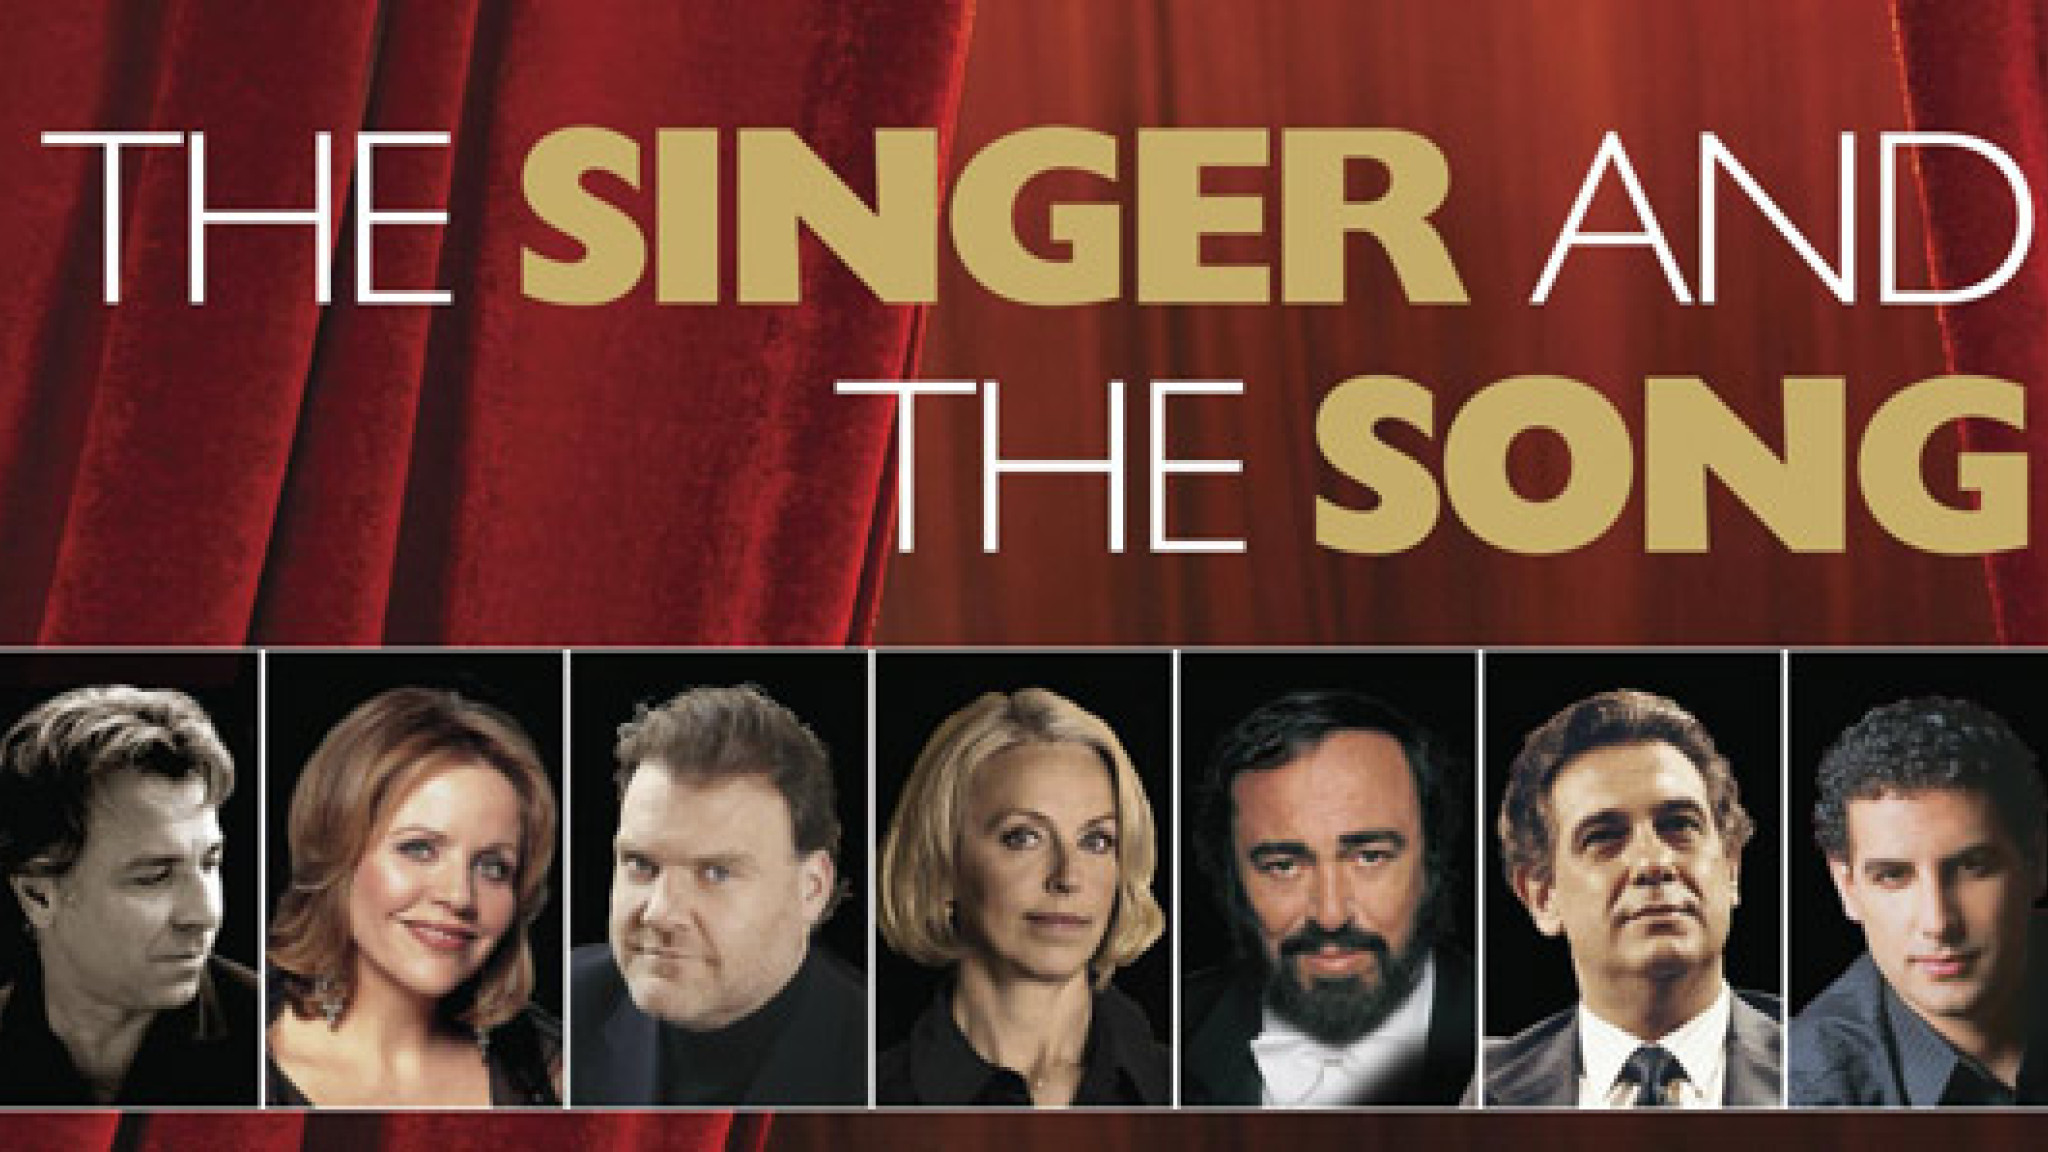 Compilation "The Singer And The Song" © Decca